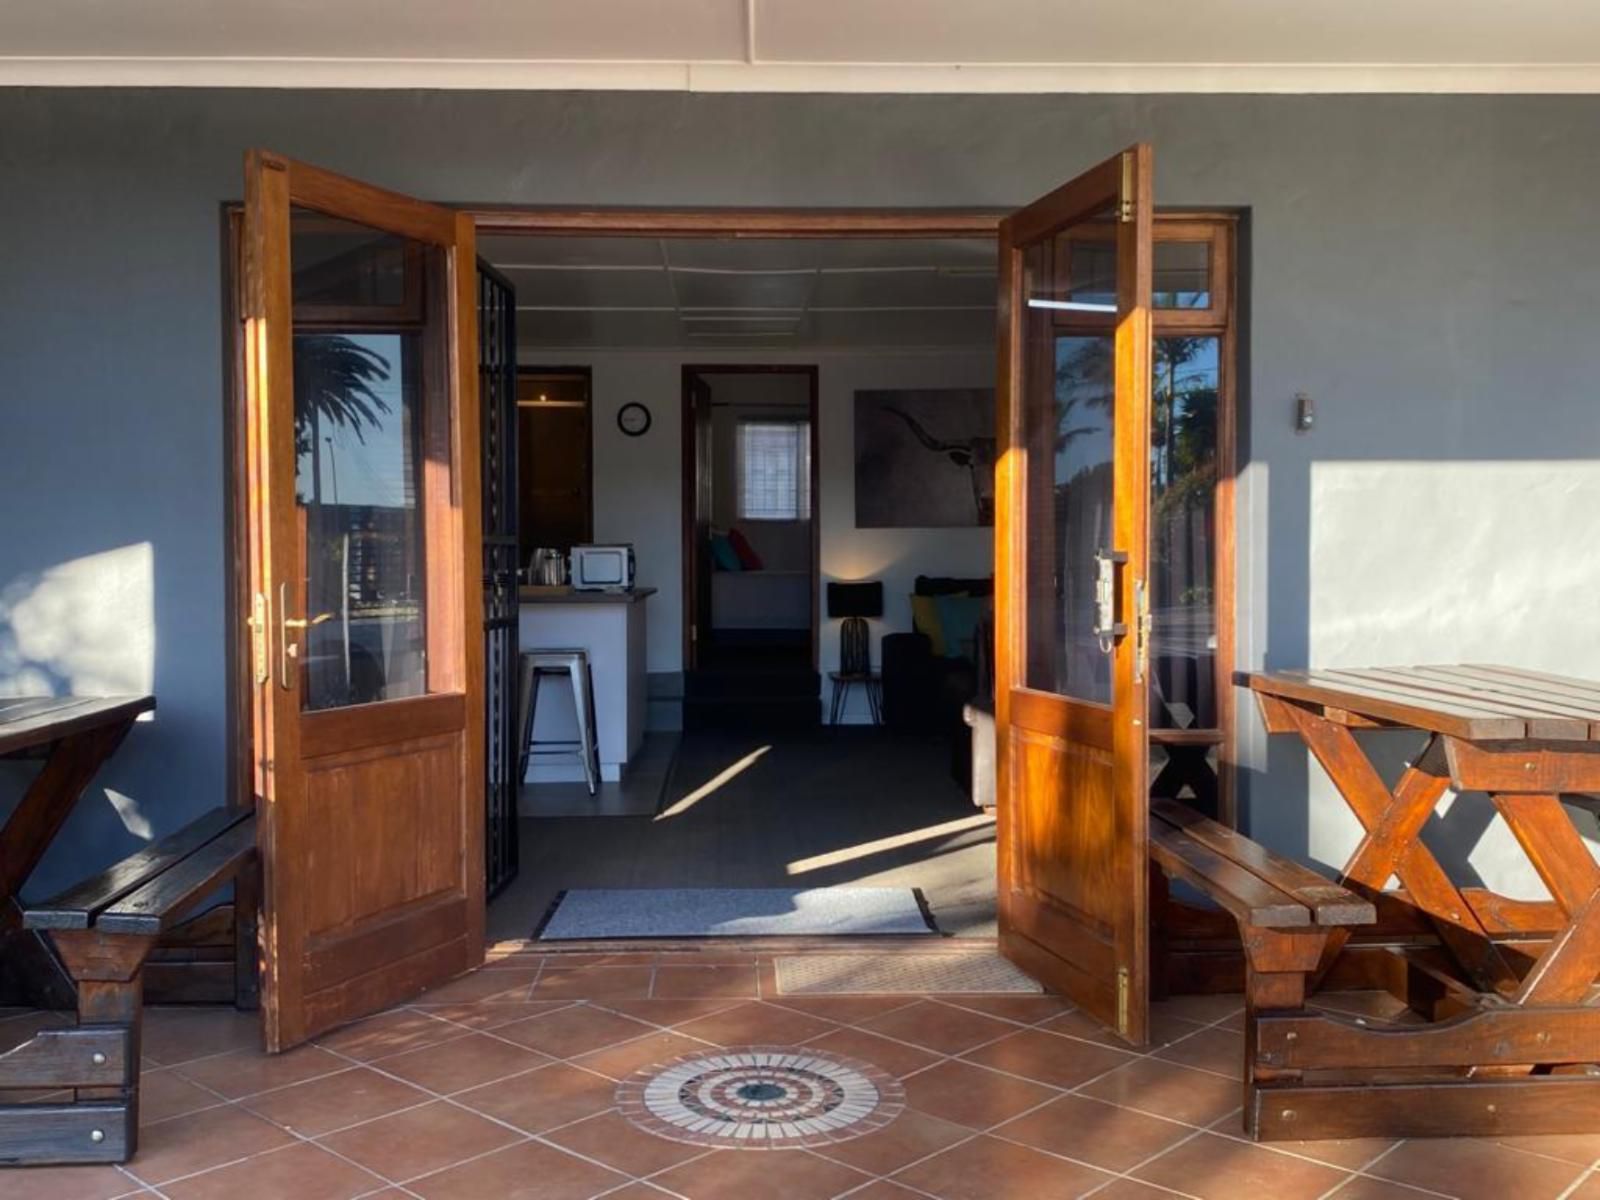 Dolphin Circle Bed And Breakfast Plett Central Plettenberg Bay Western Cape South Africa Door, Architecture, House, Building, Living Room